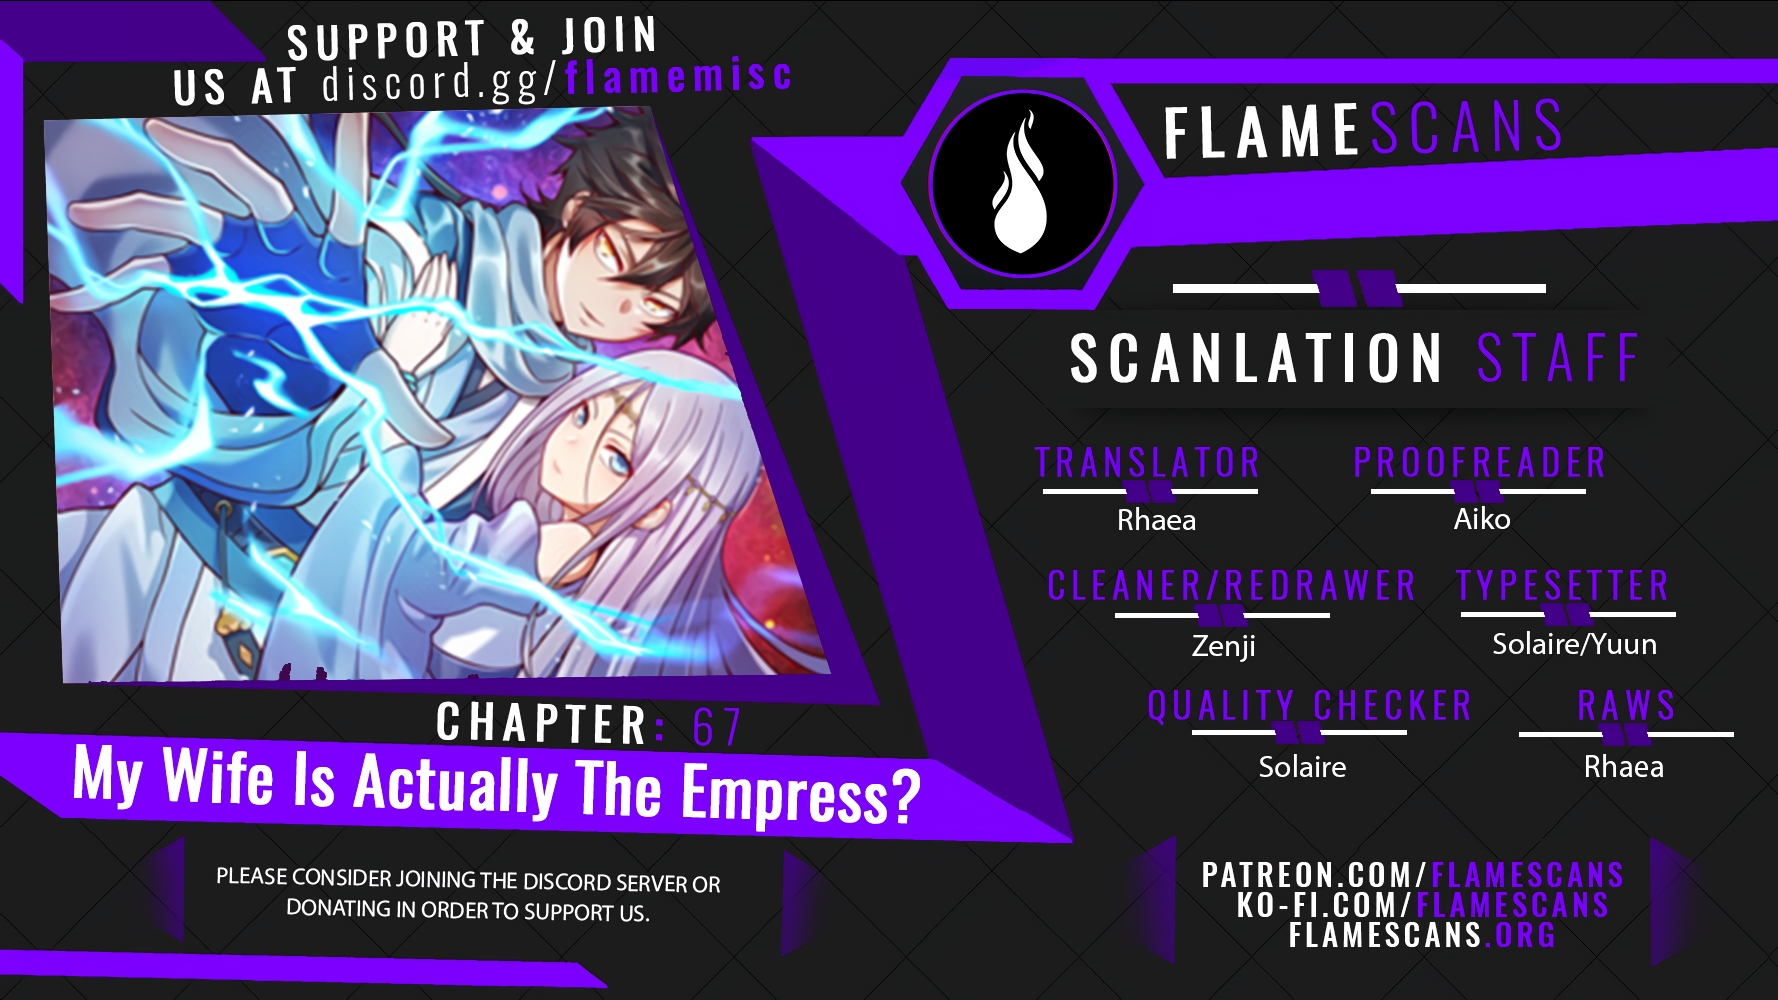 My Wife Is Actually The Empress? - Chapter 14177 - Image 1